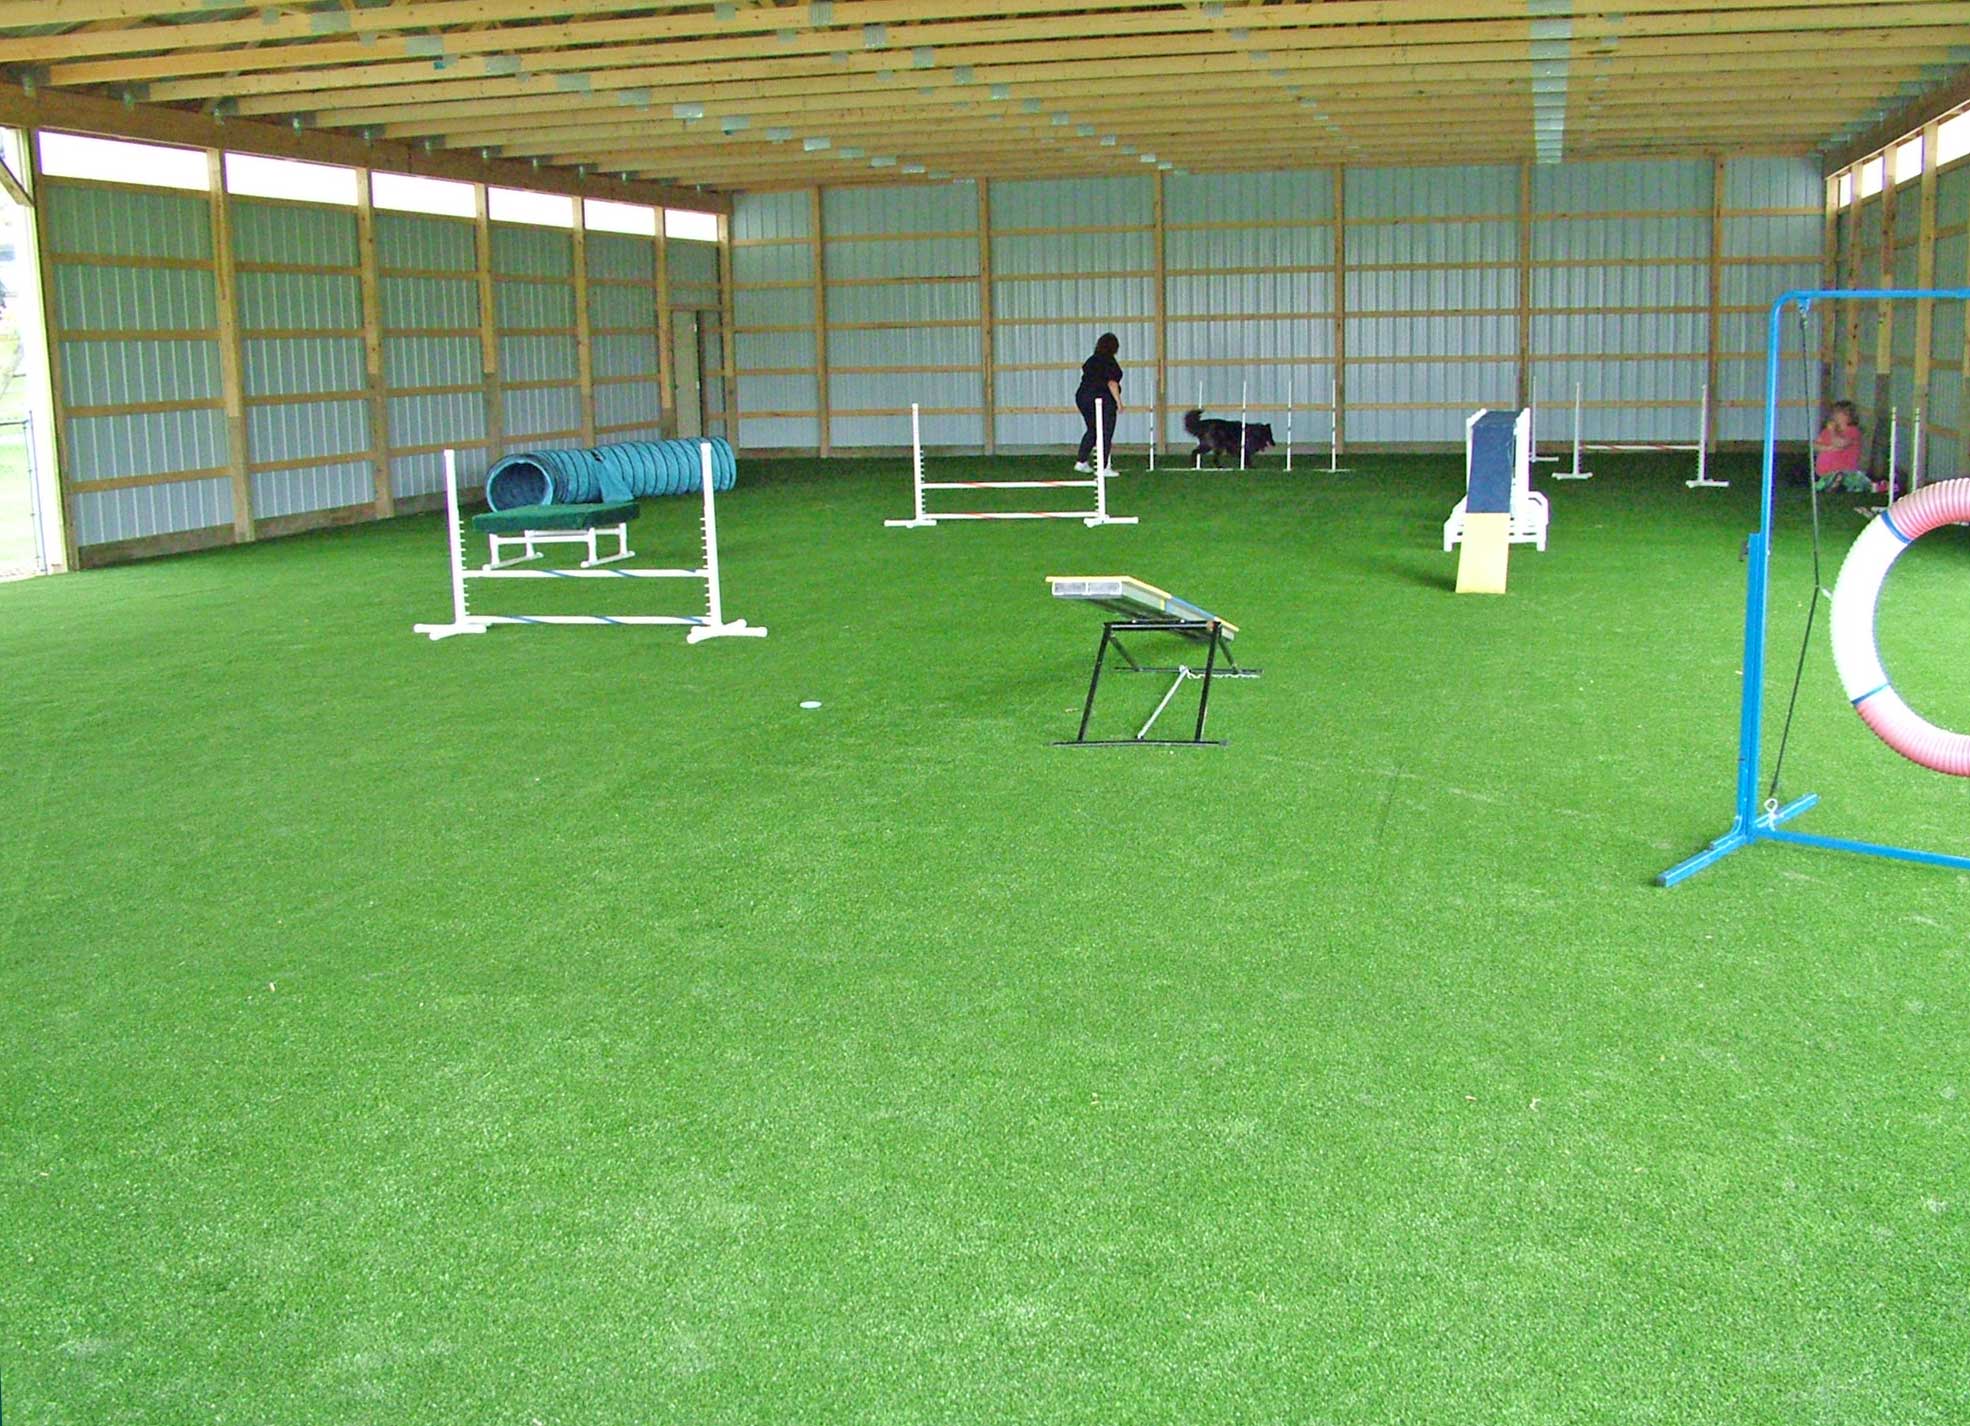 Pavilion's First Use with Agility Equipment